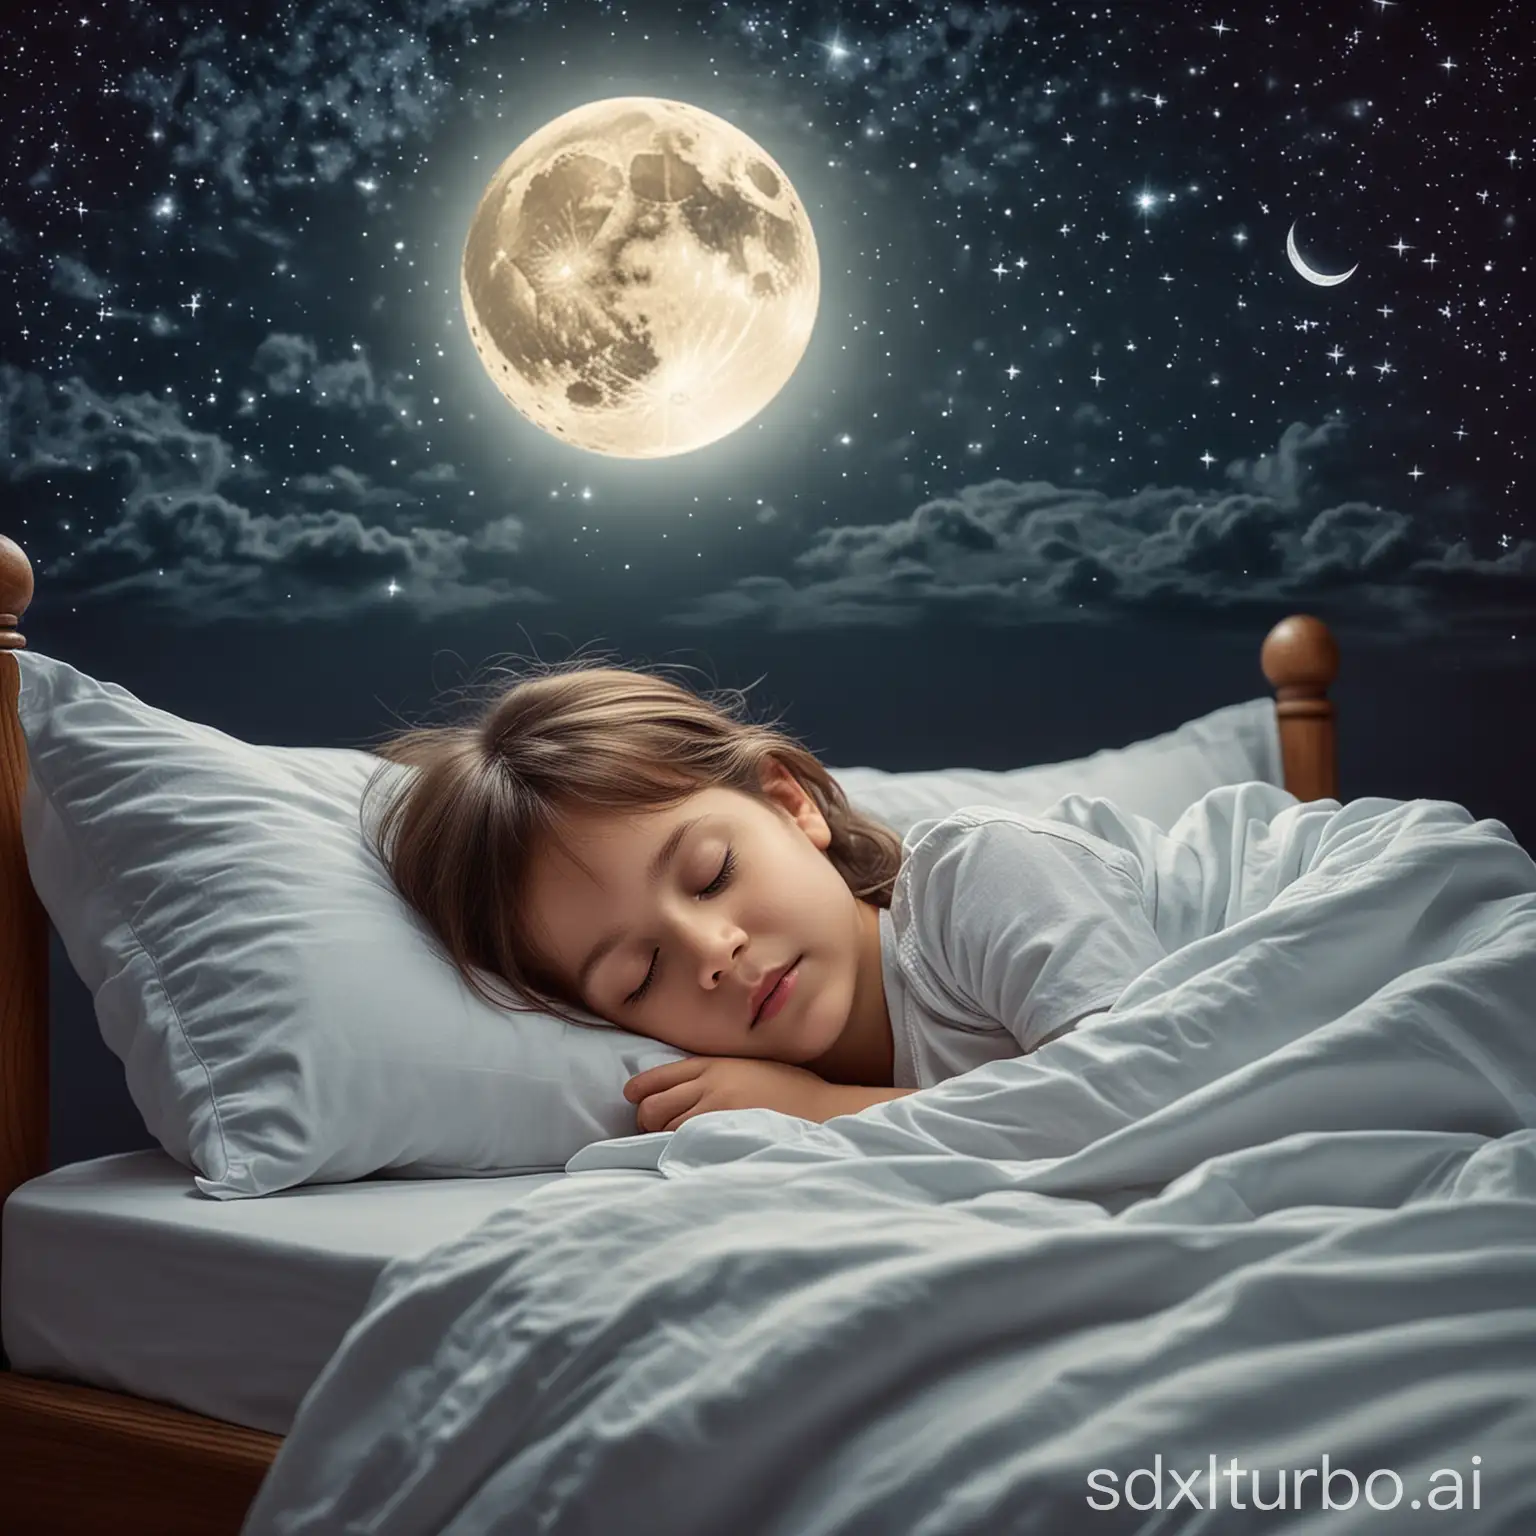 a child sleeping in bed, dreaming of holidays, outside it's night, one can see the moon